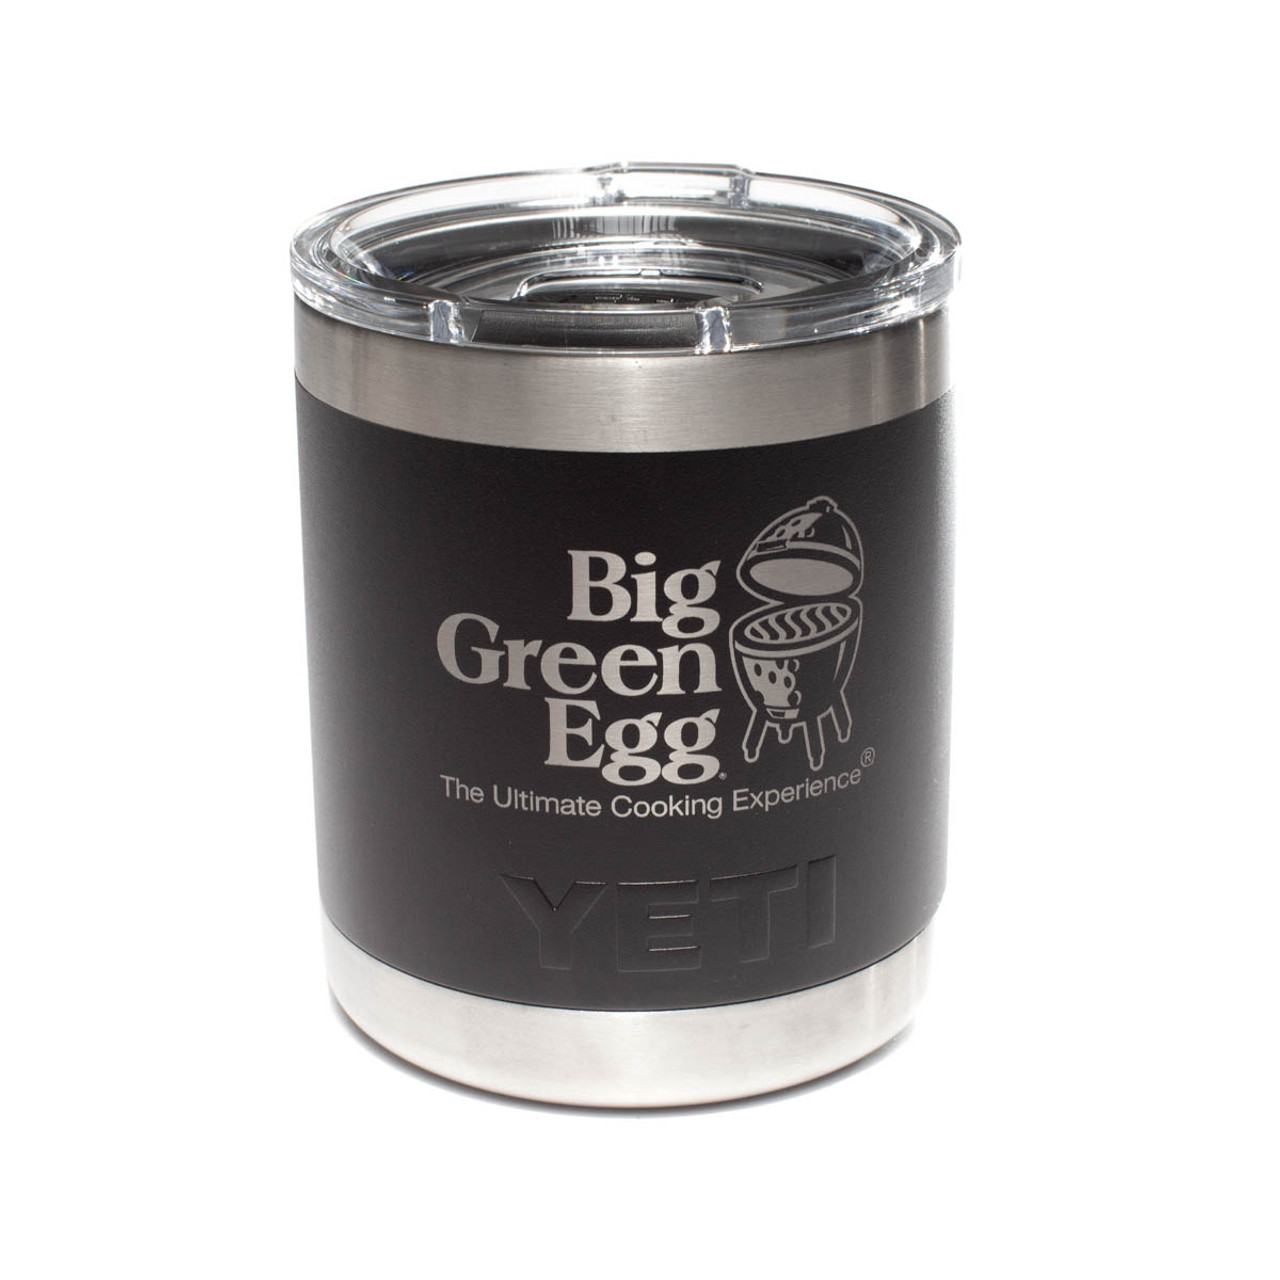 https://cdn11.bigcommerce.com/s-xj9col3syn/images/stencil/1280x1280/products/750/2690/YETI_10_ounce_Low_Ball_with_Official_Big_Green_Egg_Logo_1290171__06189.1673110484.jpg?c=2